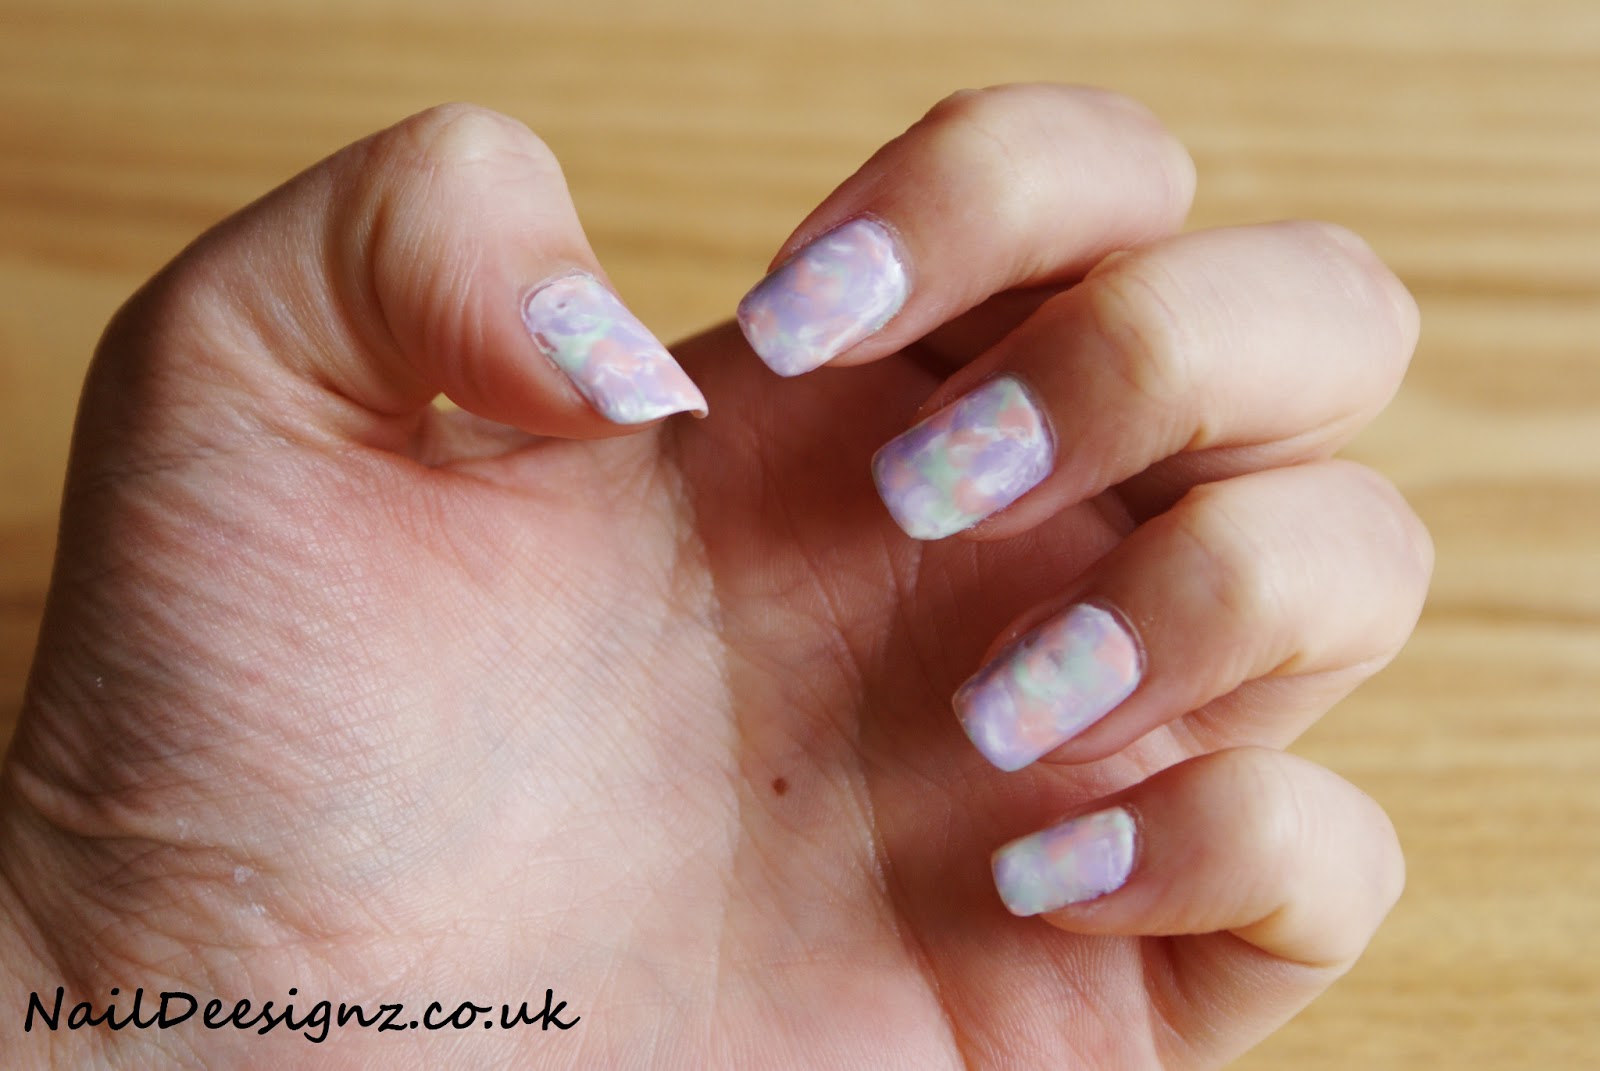 Christine's Nail Designs - Easy Nail Designs For Short Nails: Marble Effect Nail Art!